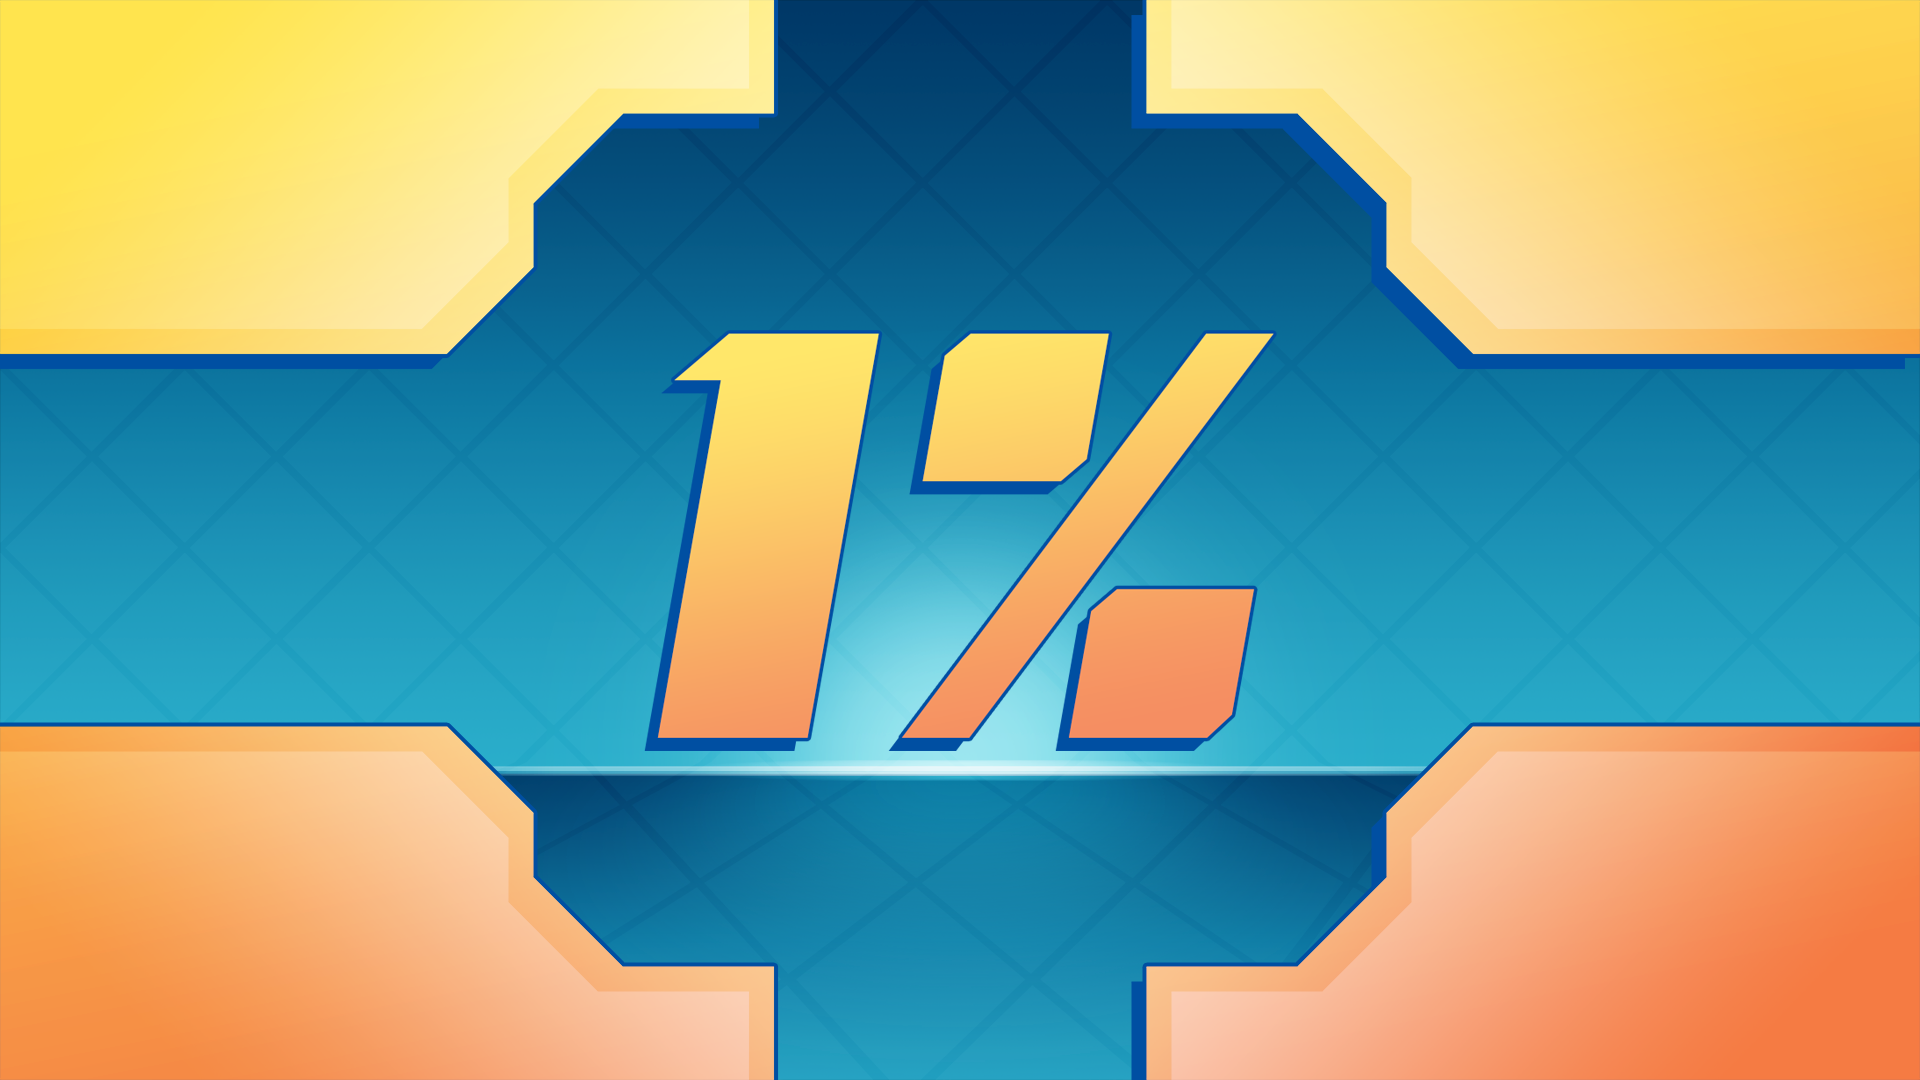 Icon for The 1%